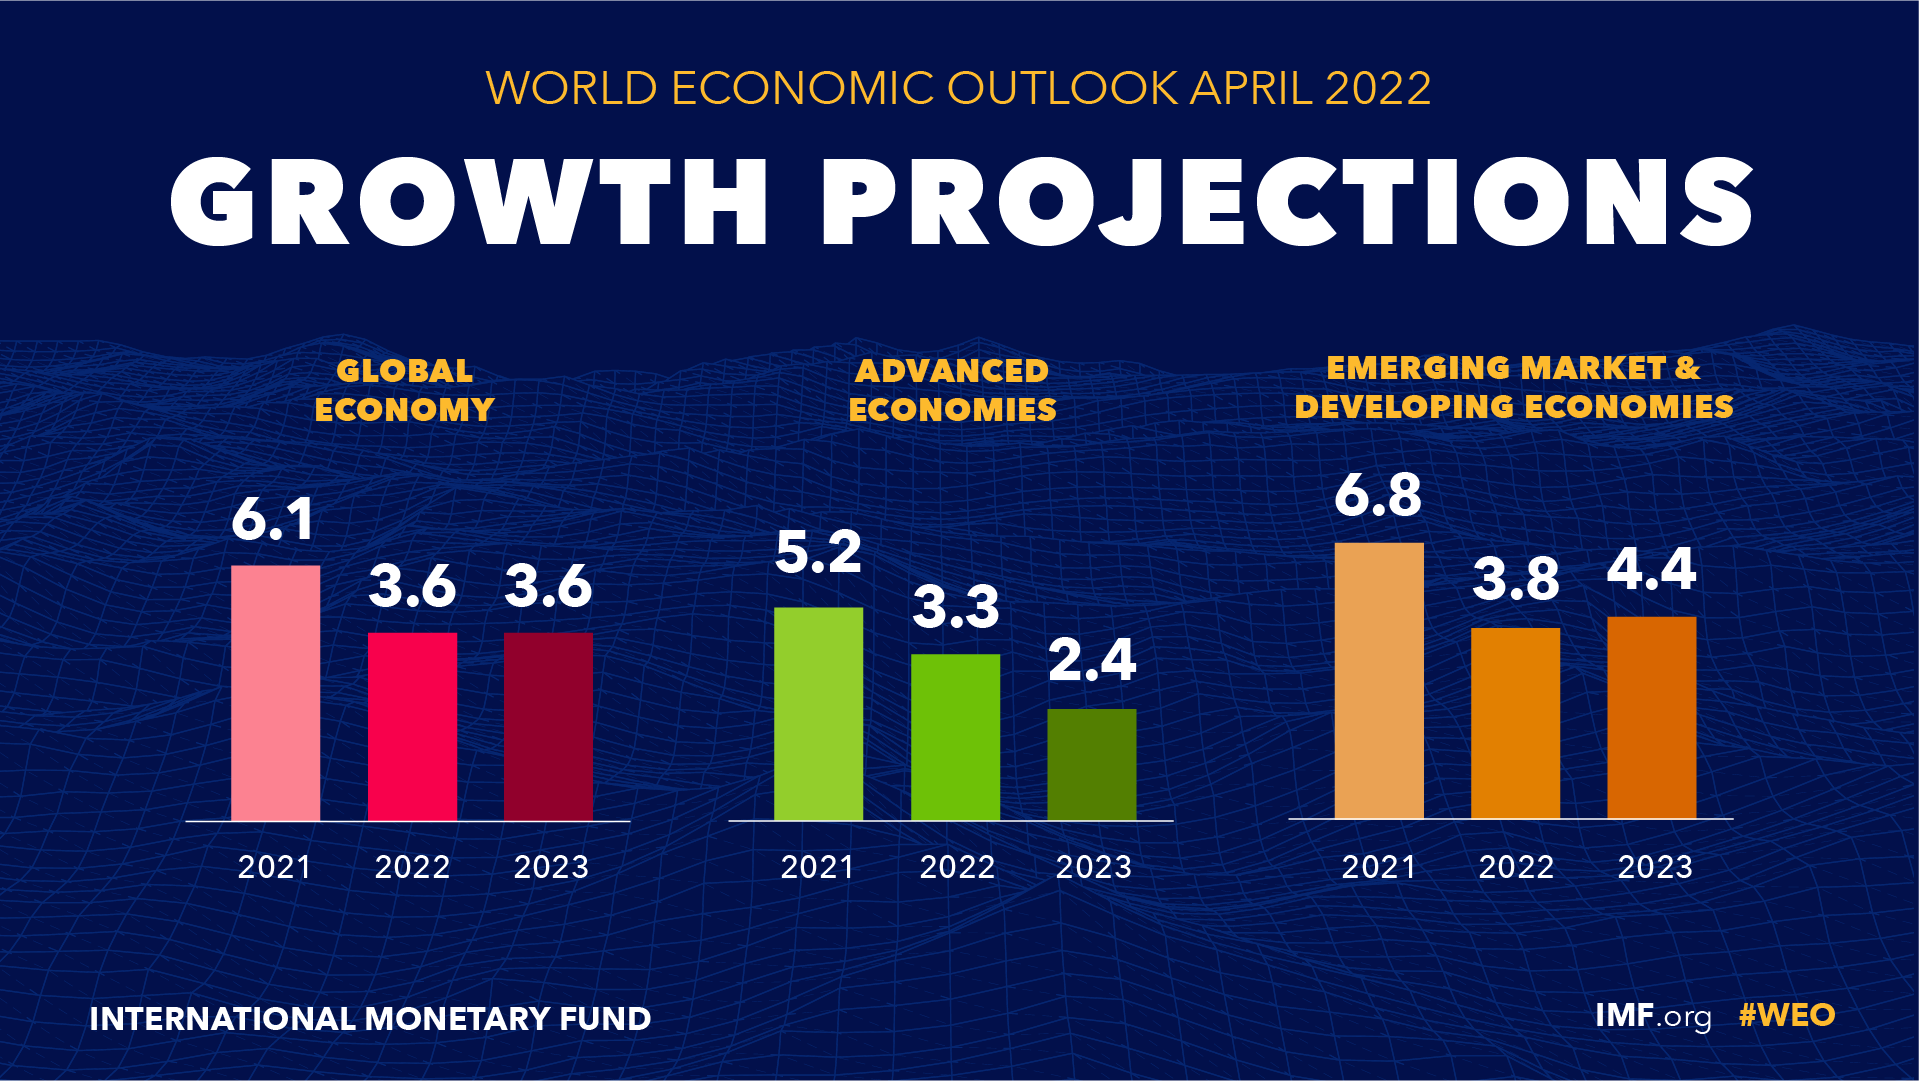 Growth projections for global economy by IMF